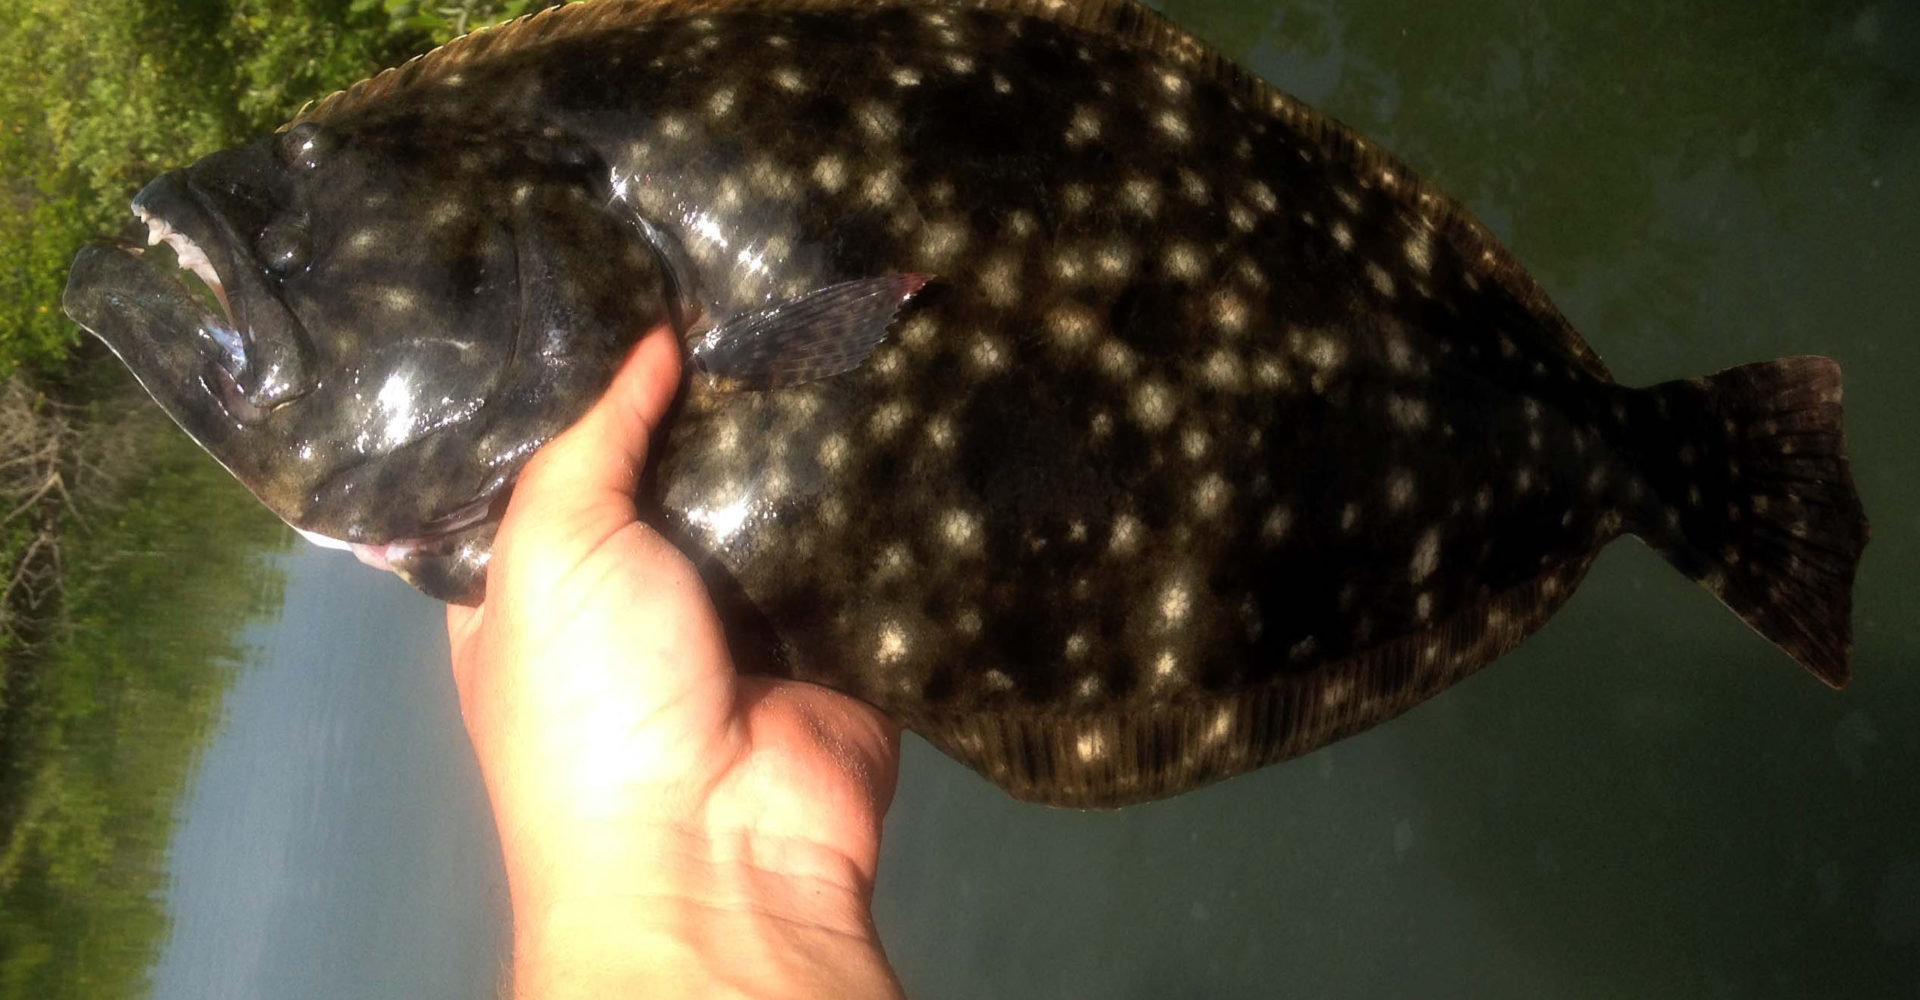 flounders are flat bodyed fish. would they adapted to live in rhe headwaters of a river